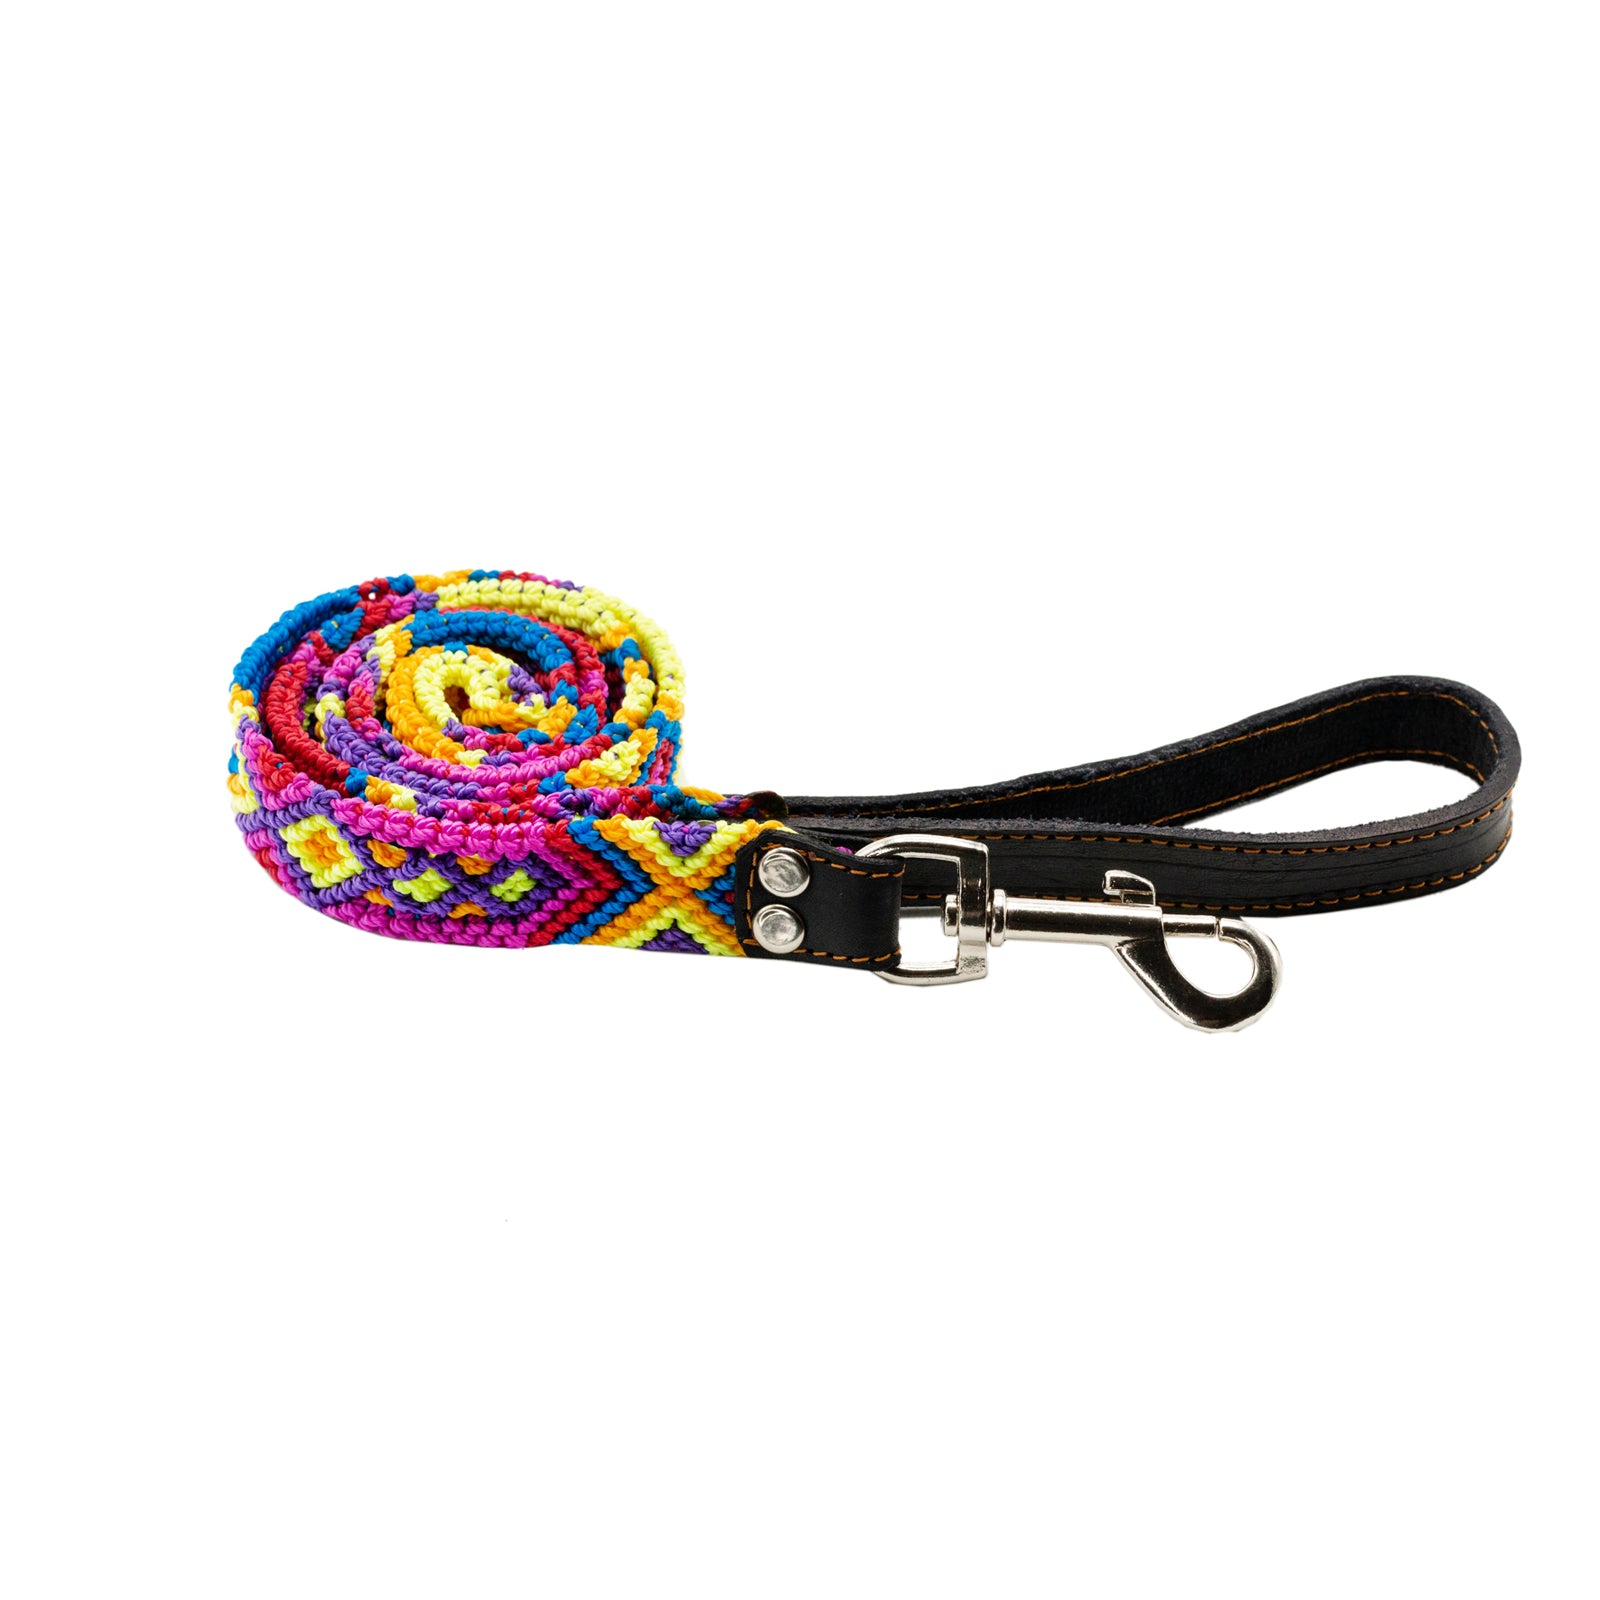 Colorful artisanal leash for dogs